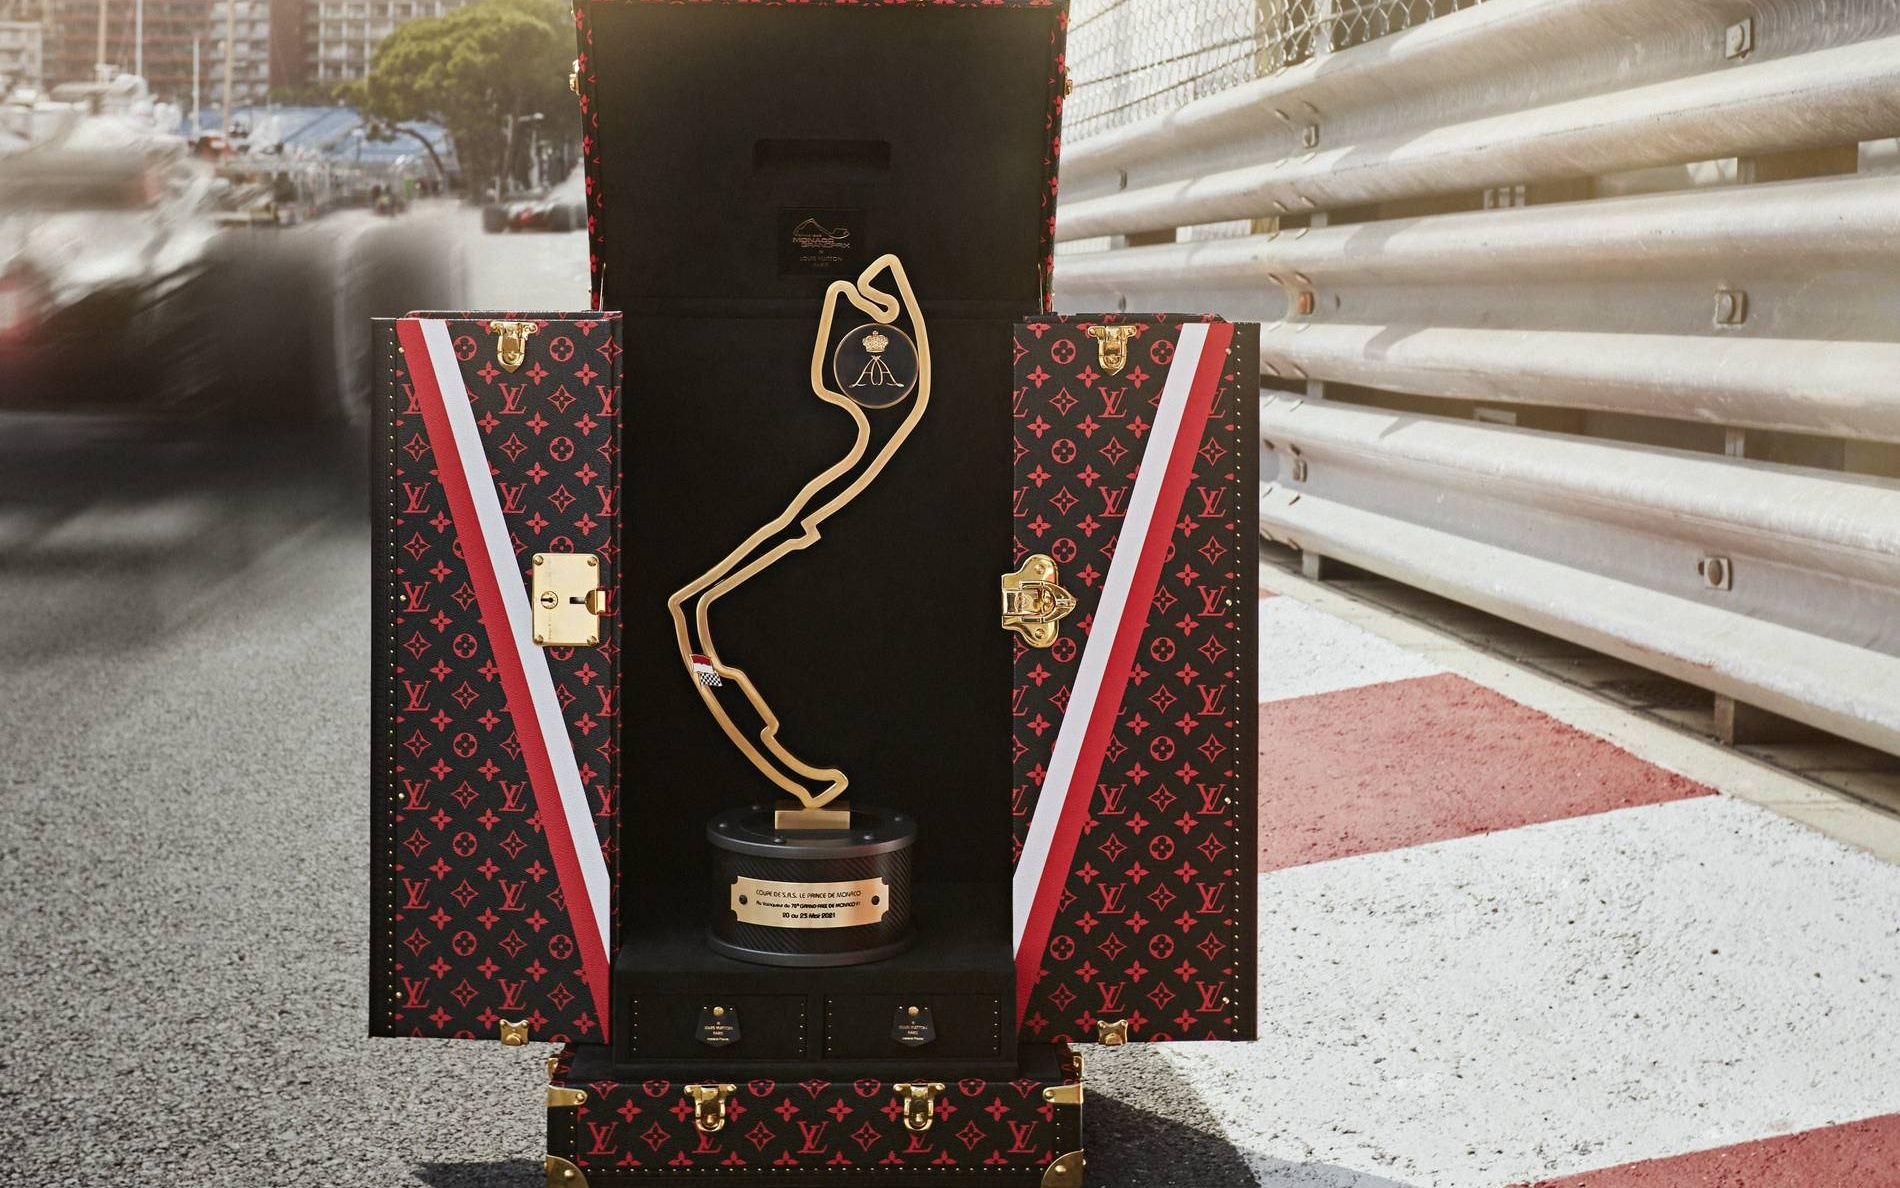 F1: Monaco Grand Prix Trophy to Travel First Class in Louis